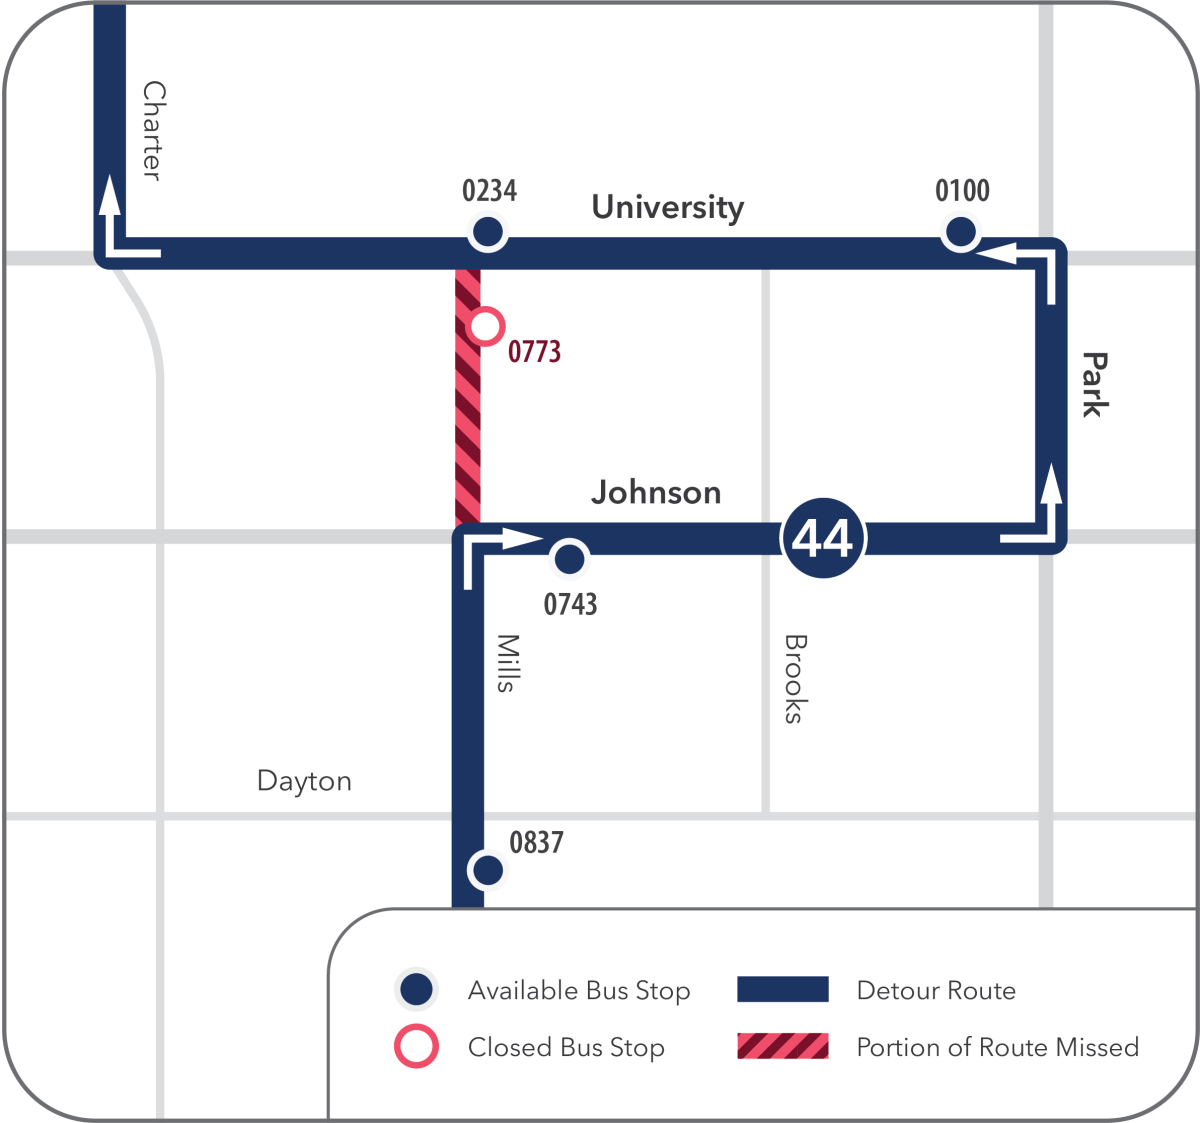 detour map showing Mills St. closure (between University and Johnson)